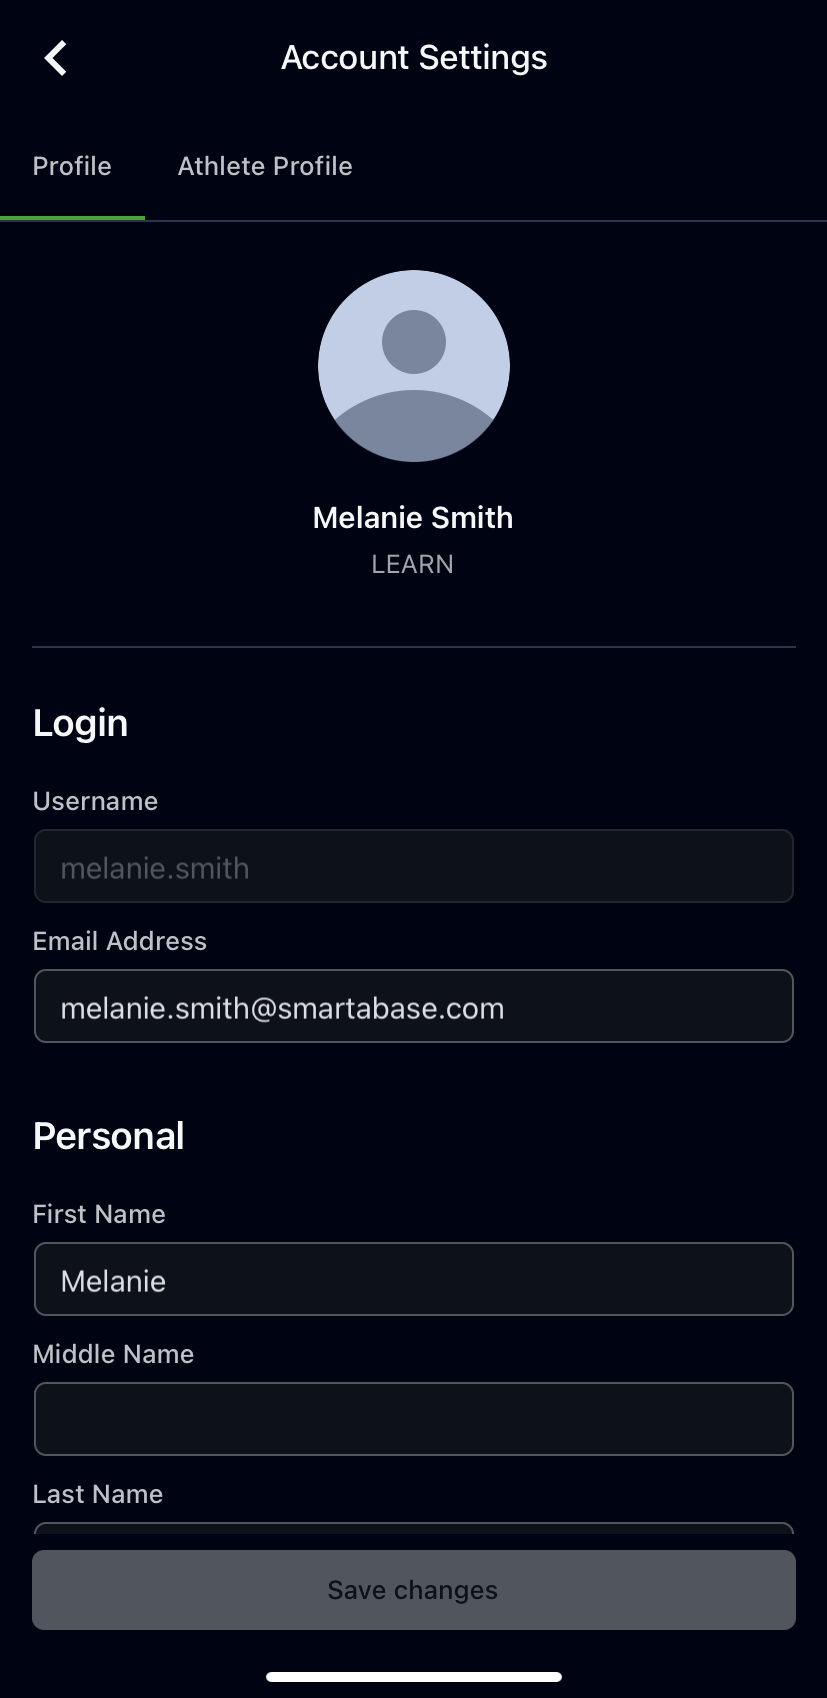 A screenshot of the account settings page on the Smartabase app. Additional profile forms are listed as tabs across the top of the screen.